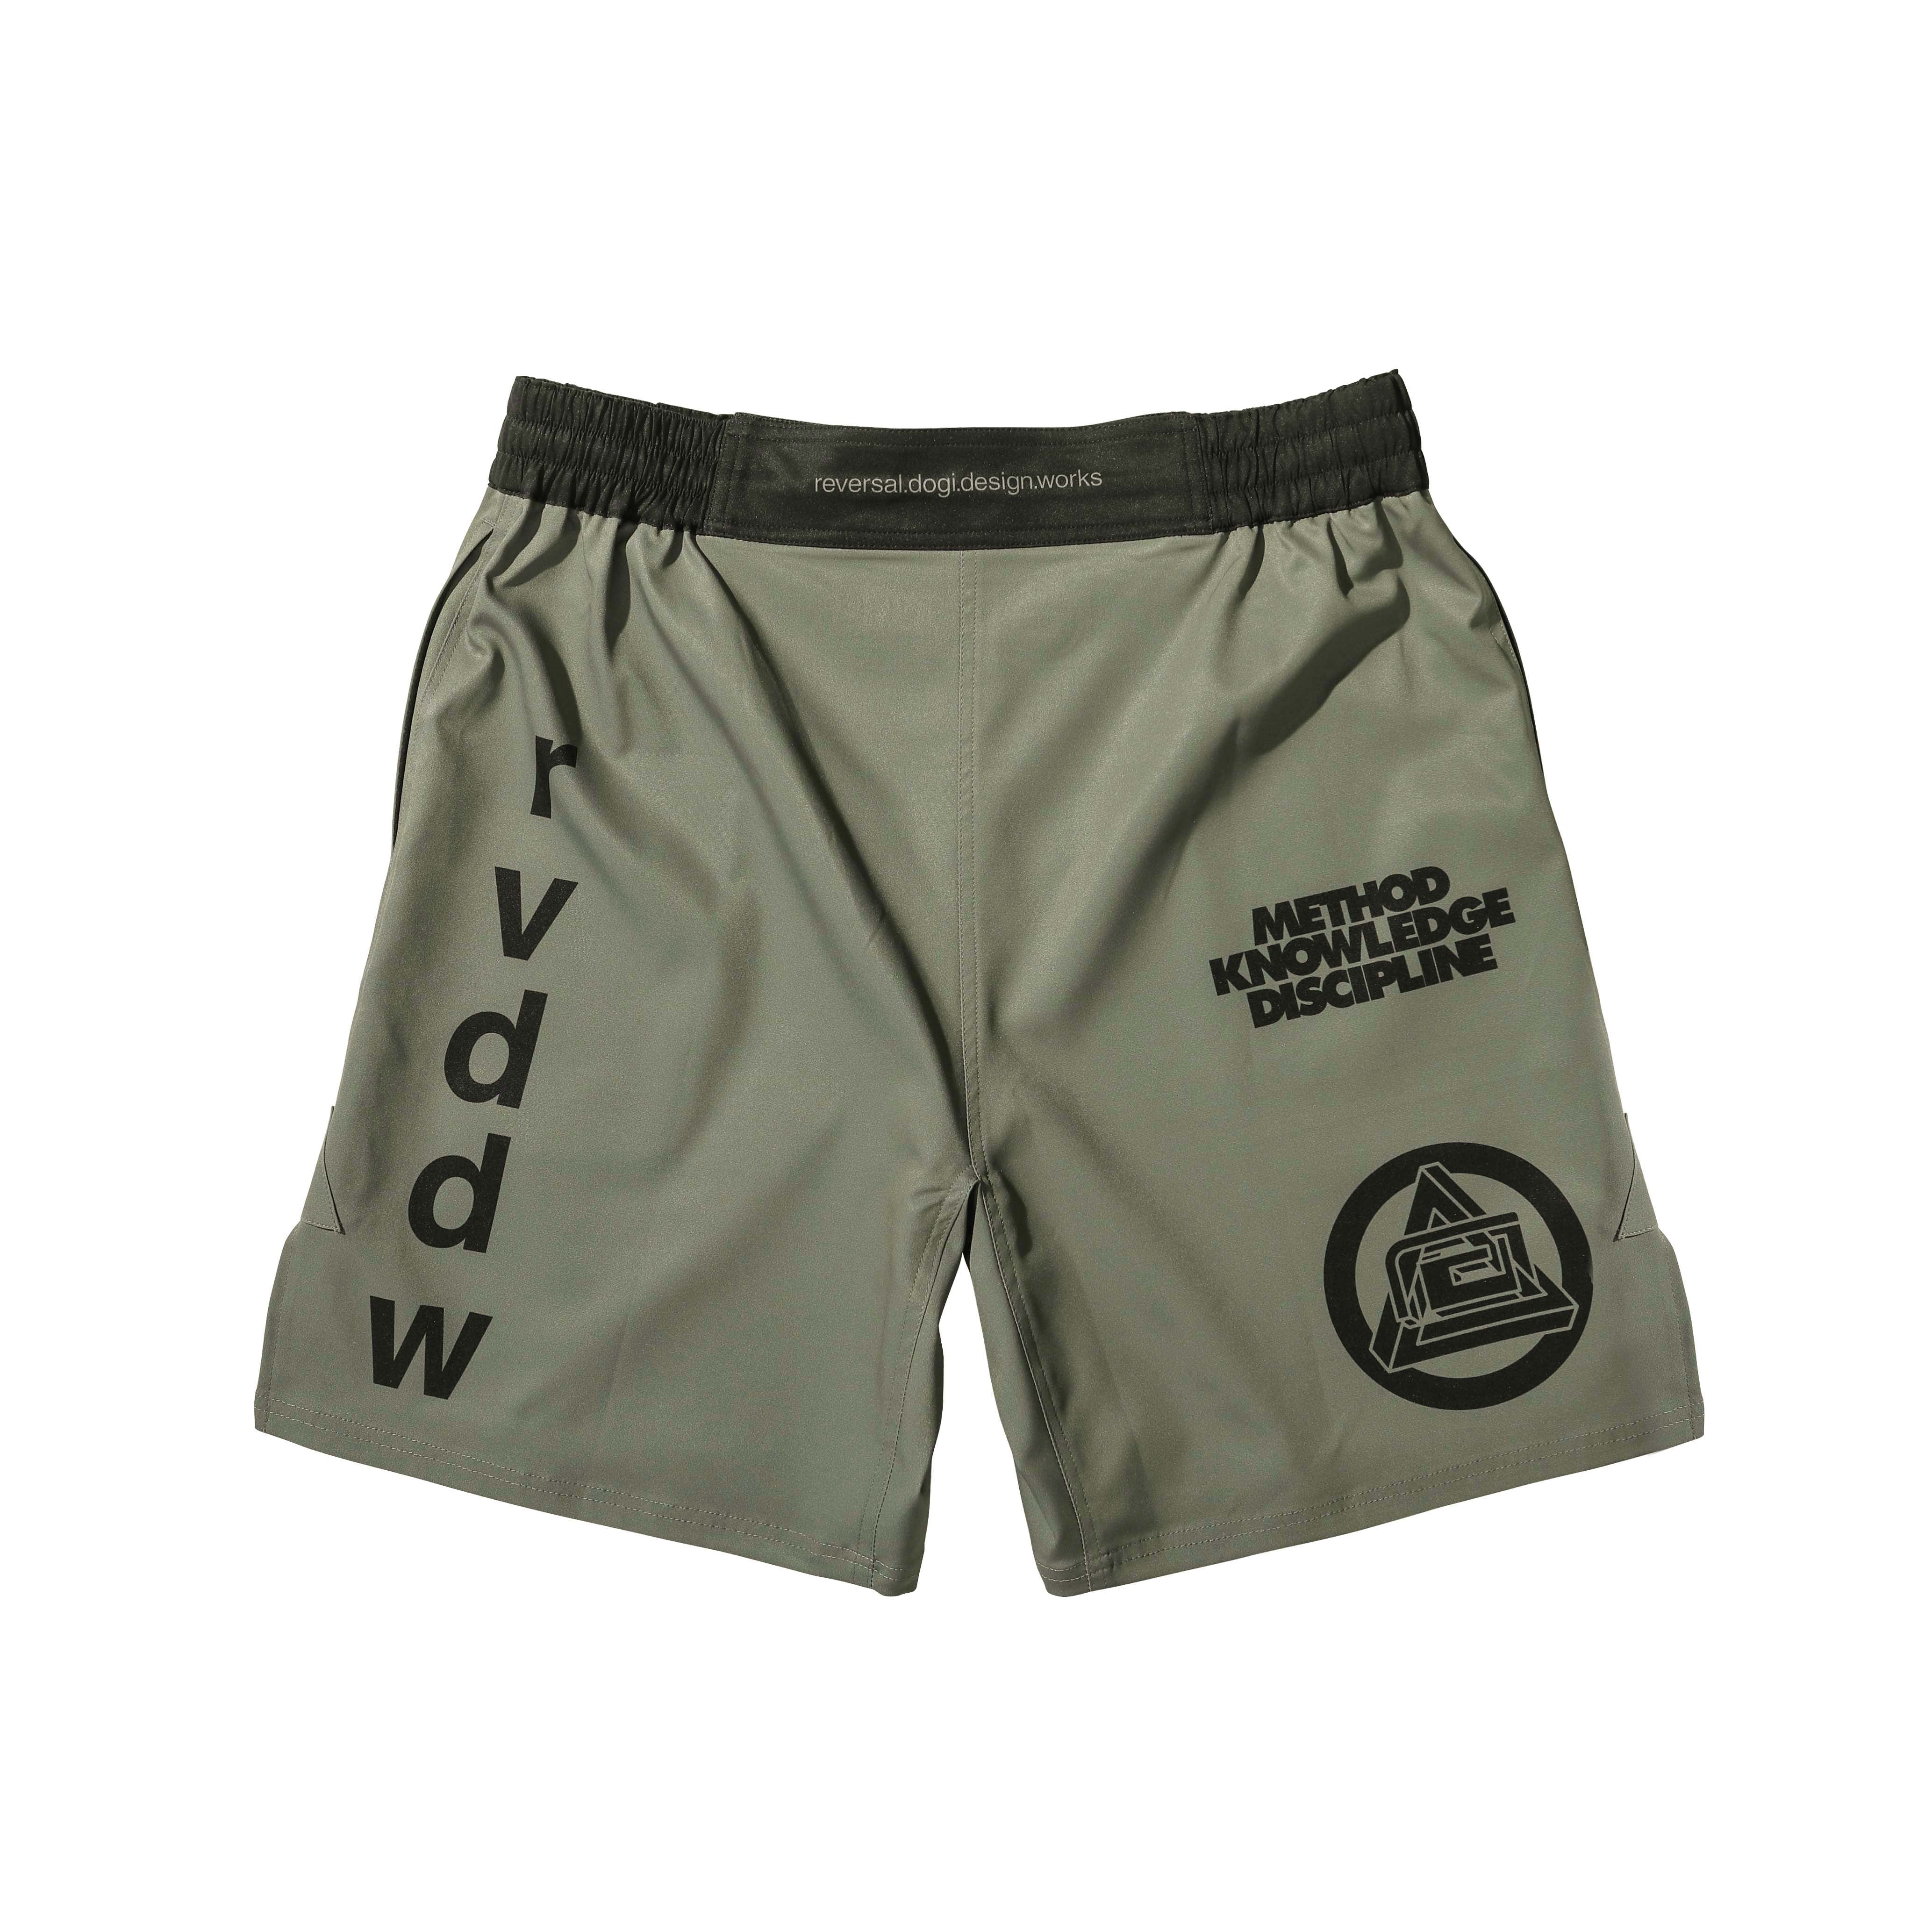 Premium RVDDW Shorts: Top Choice for Fighters!